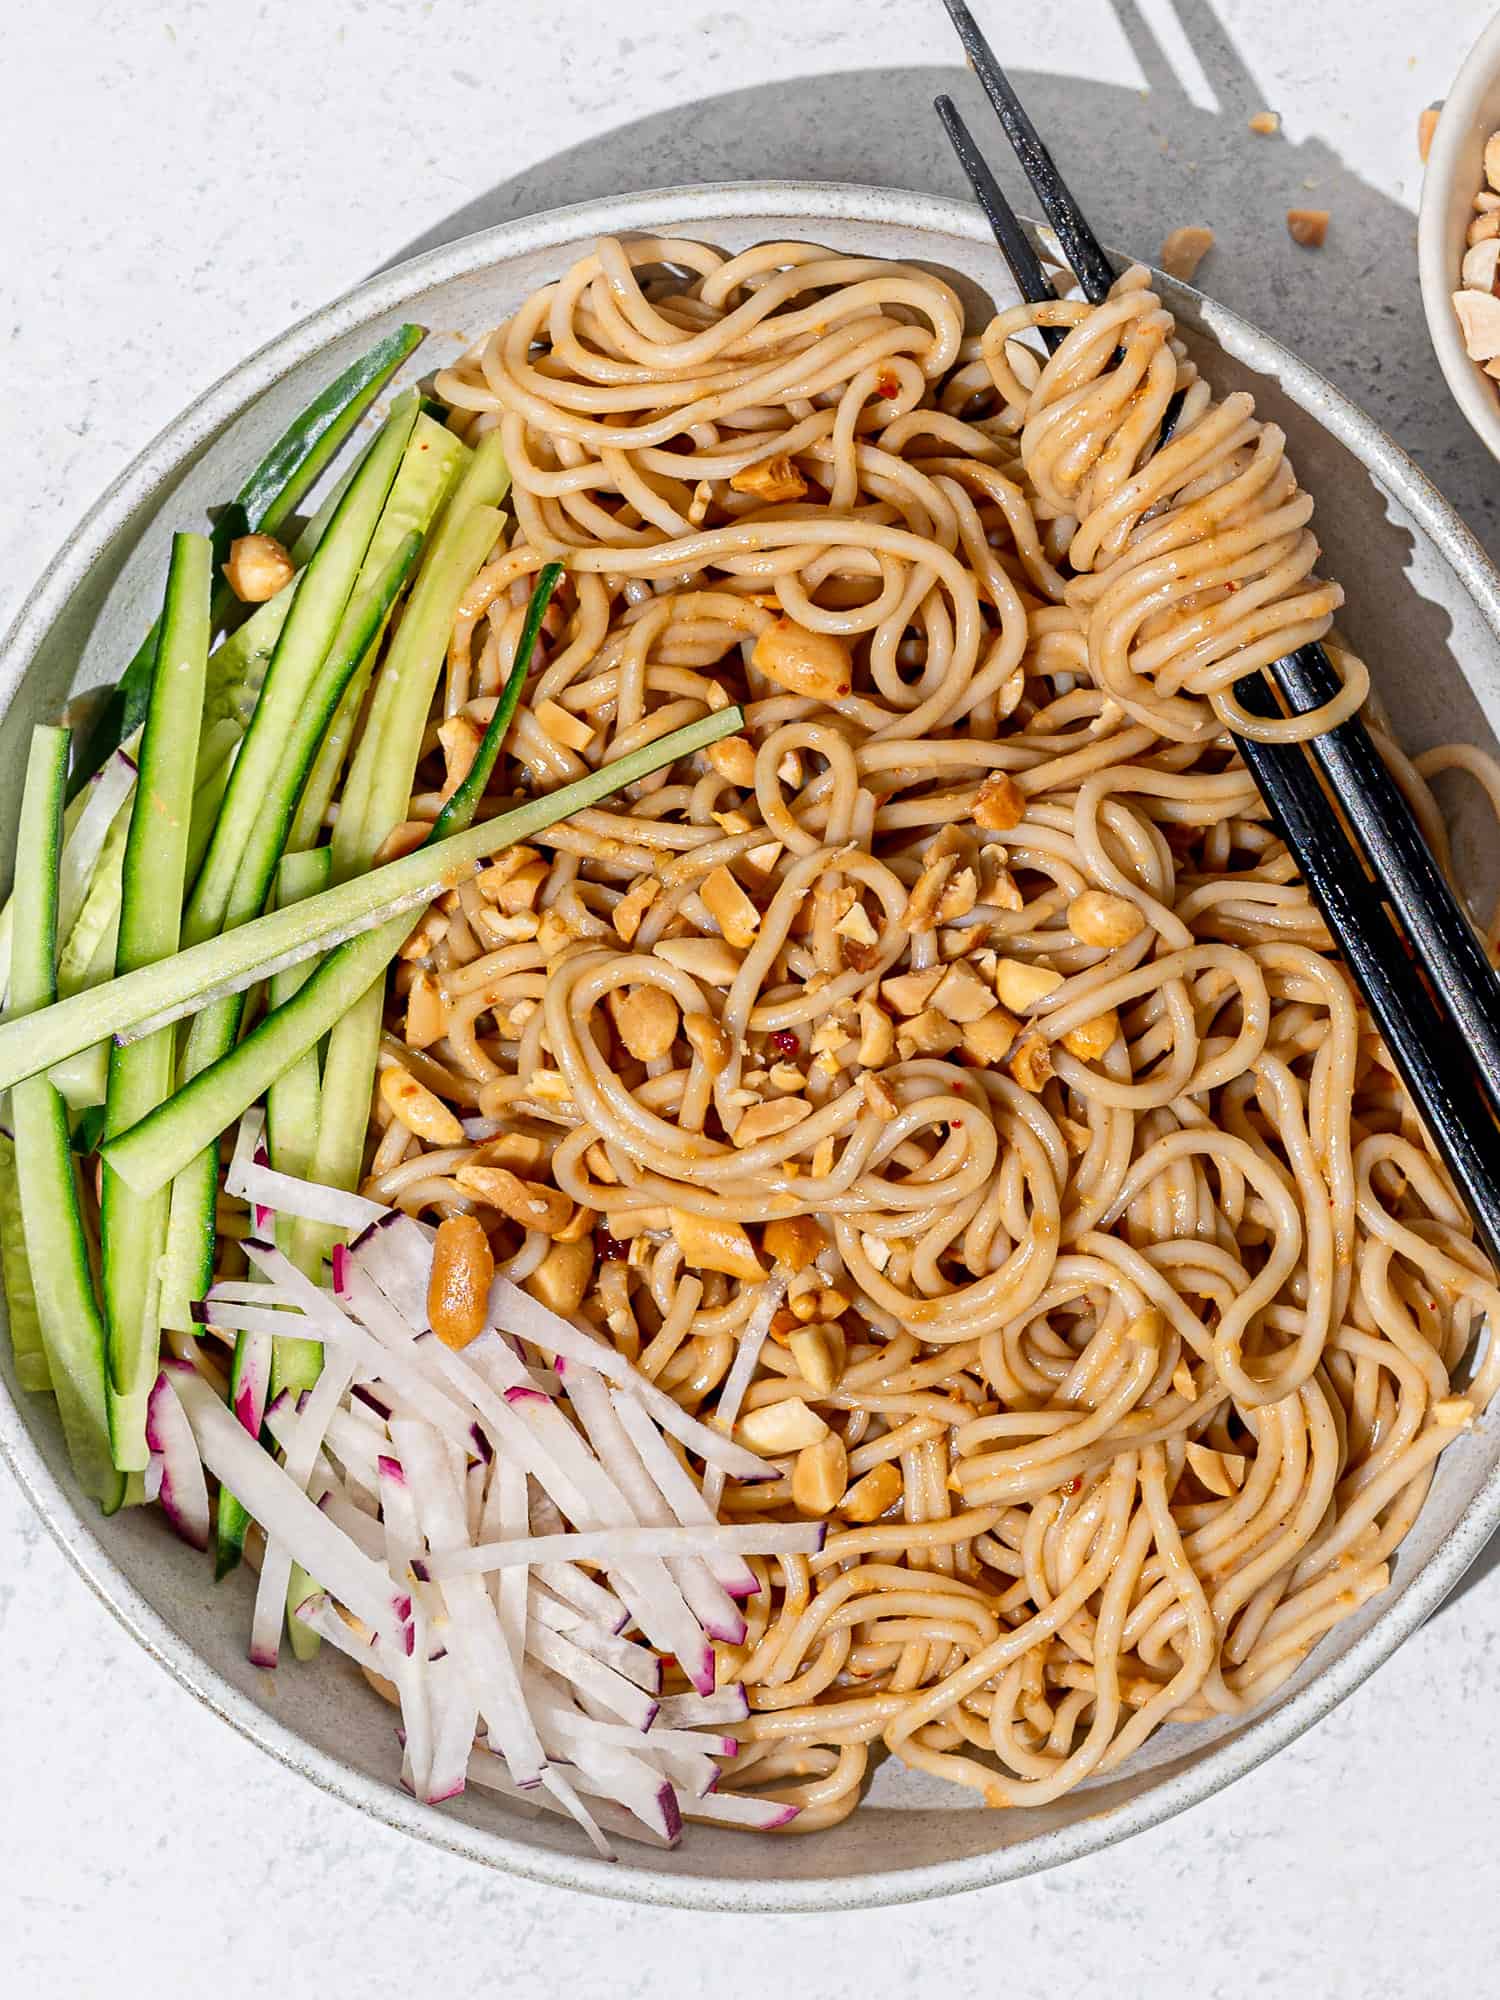 Takeout-style sesame noodles served in bowl with cucumbers and radishes